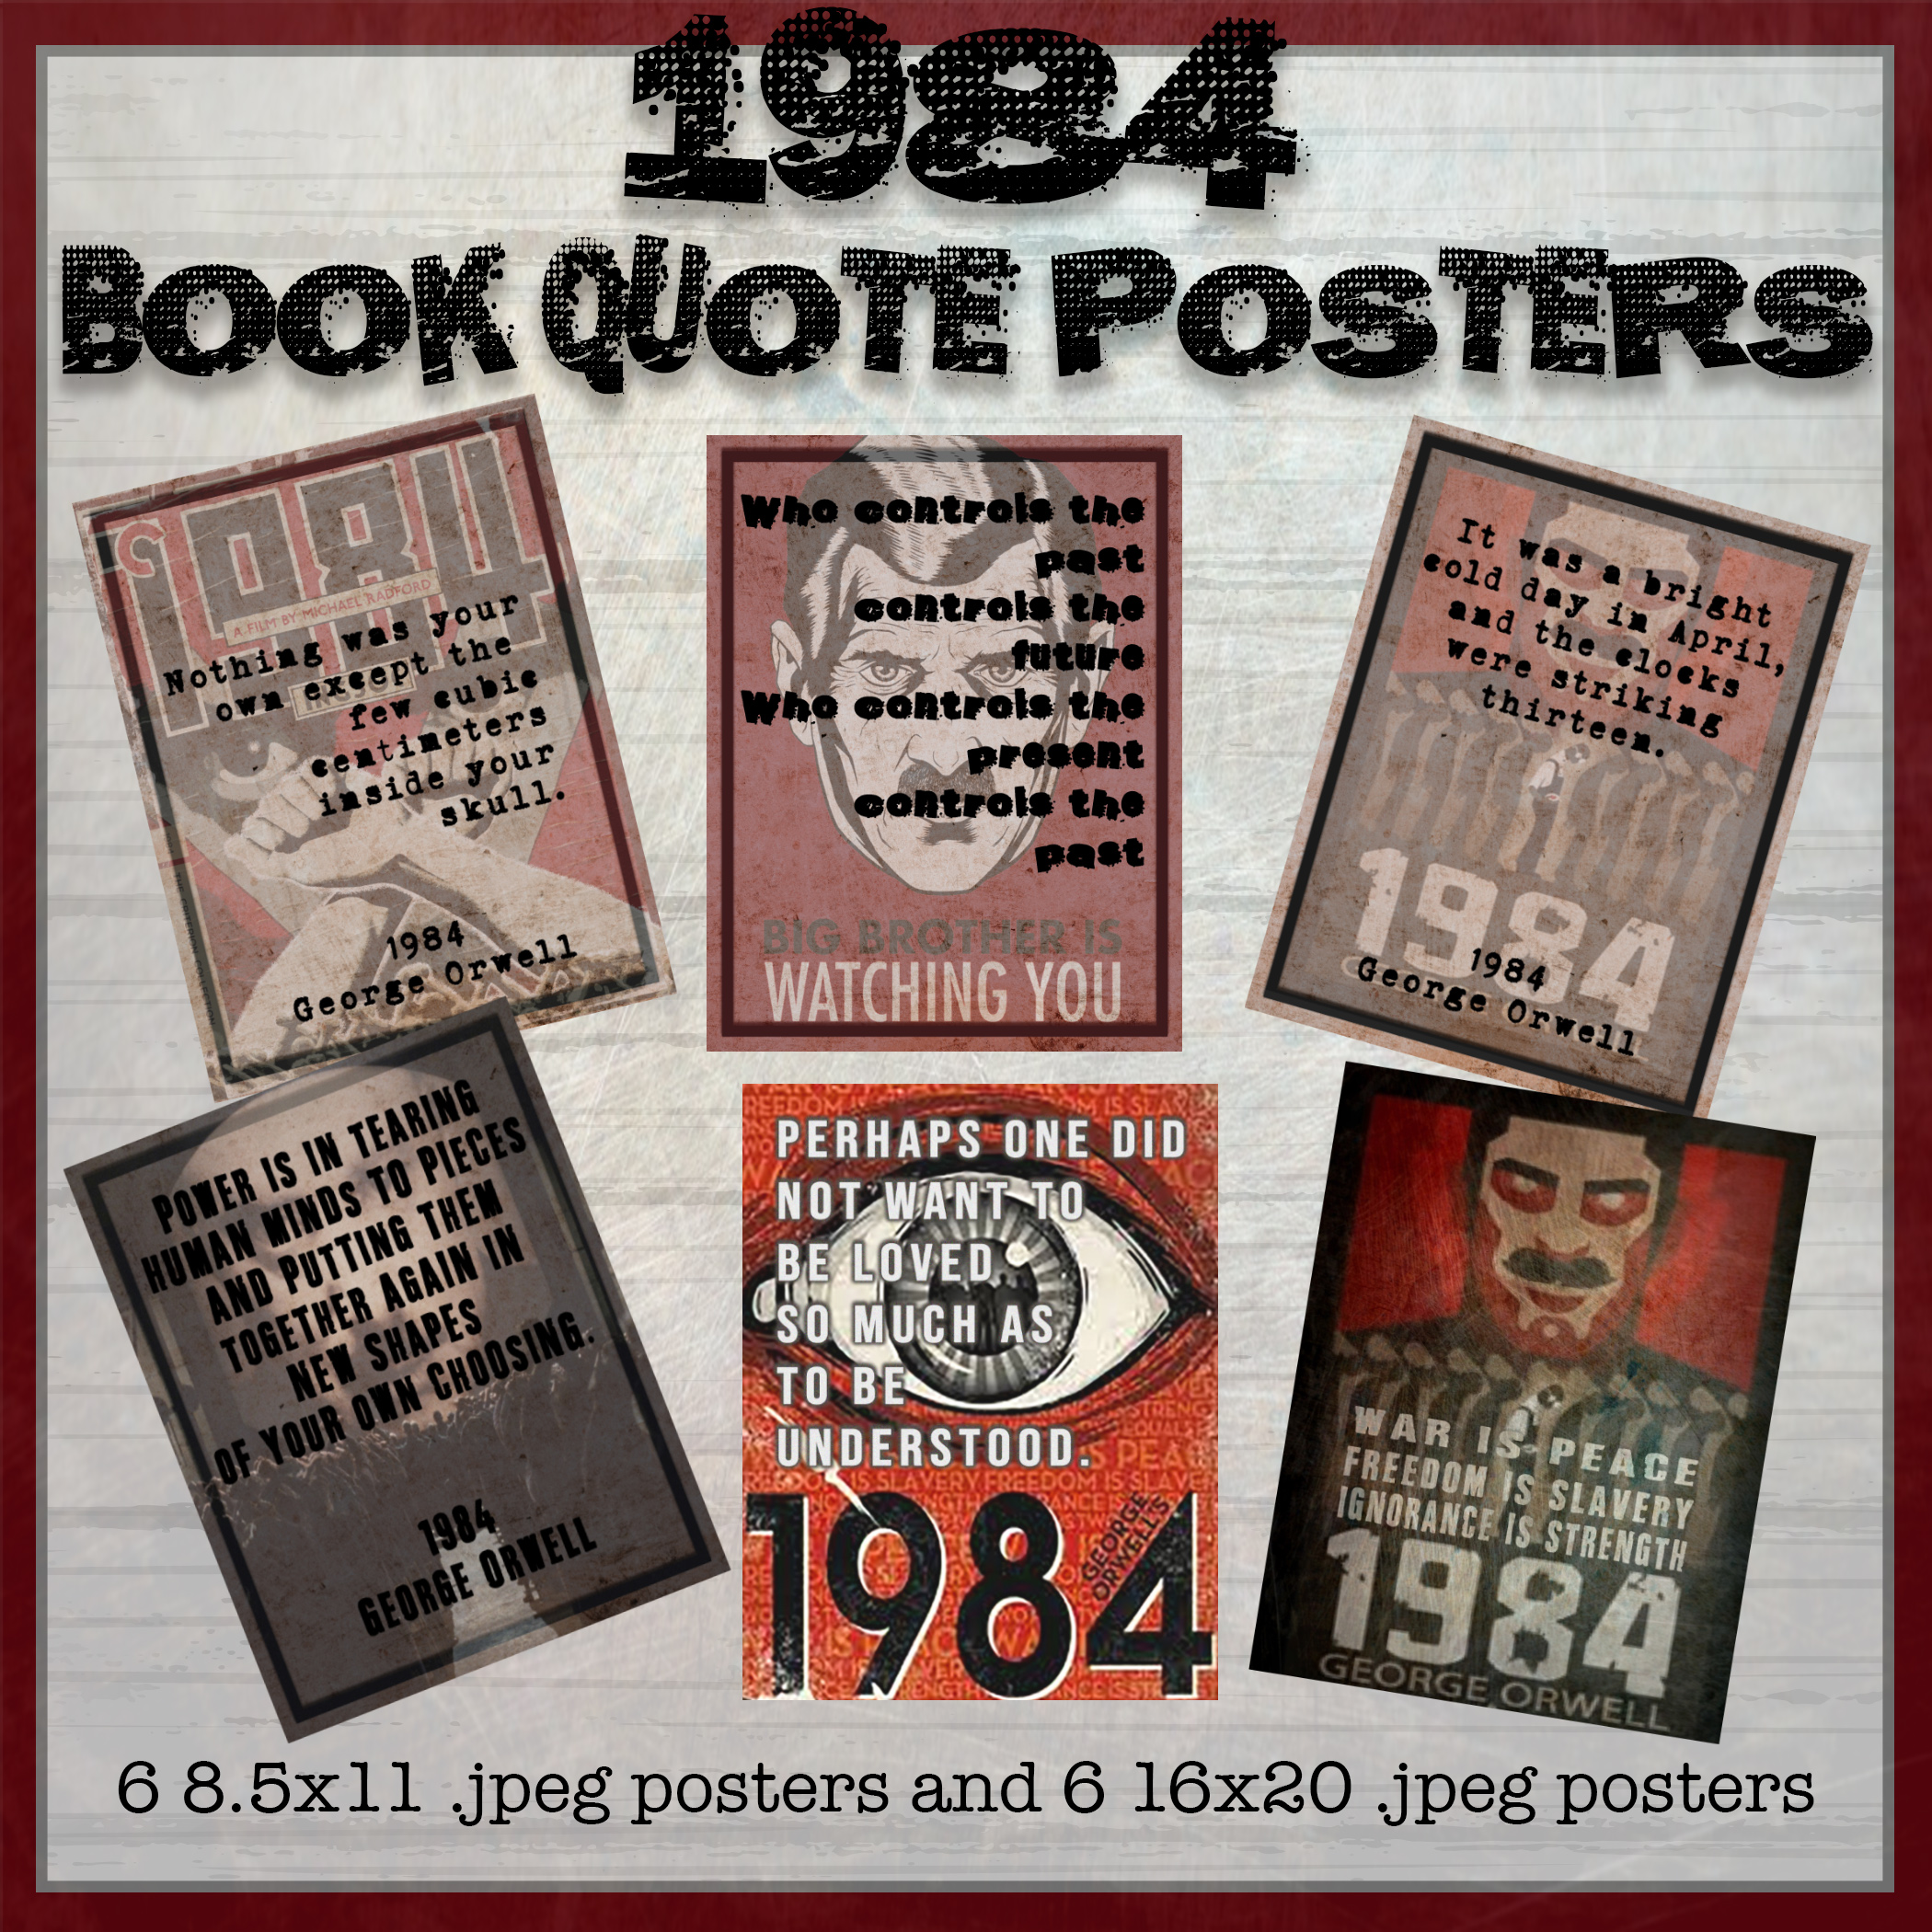 1984 posters